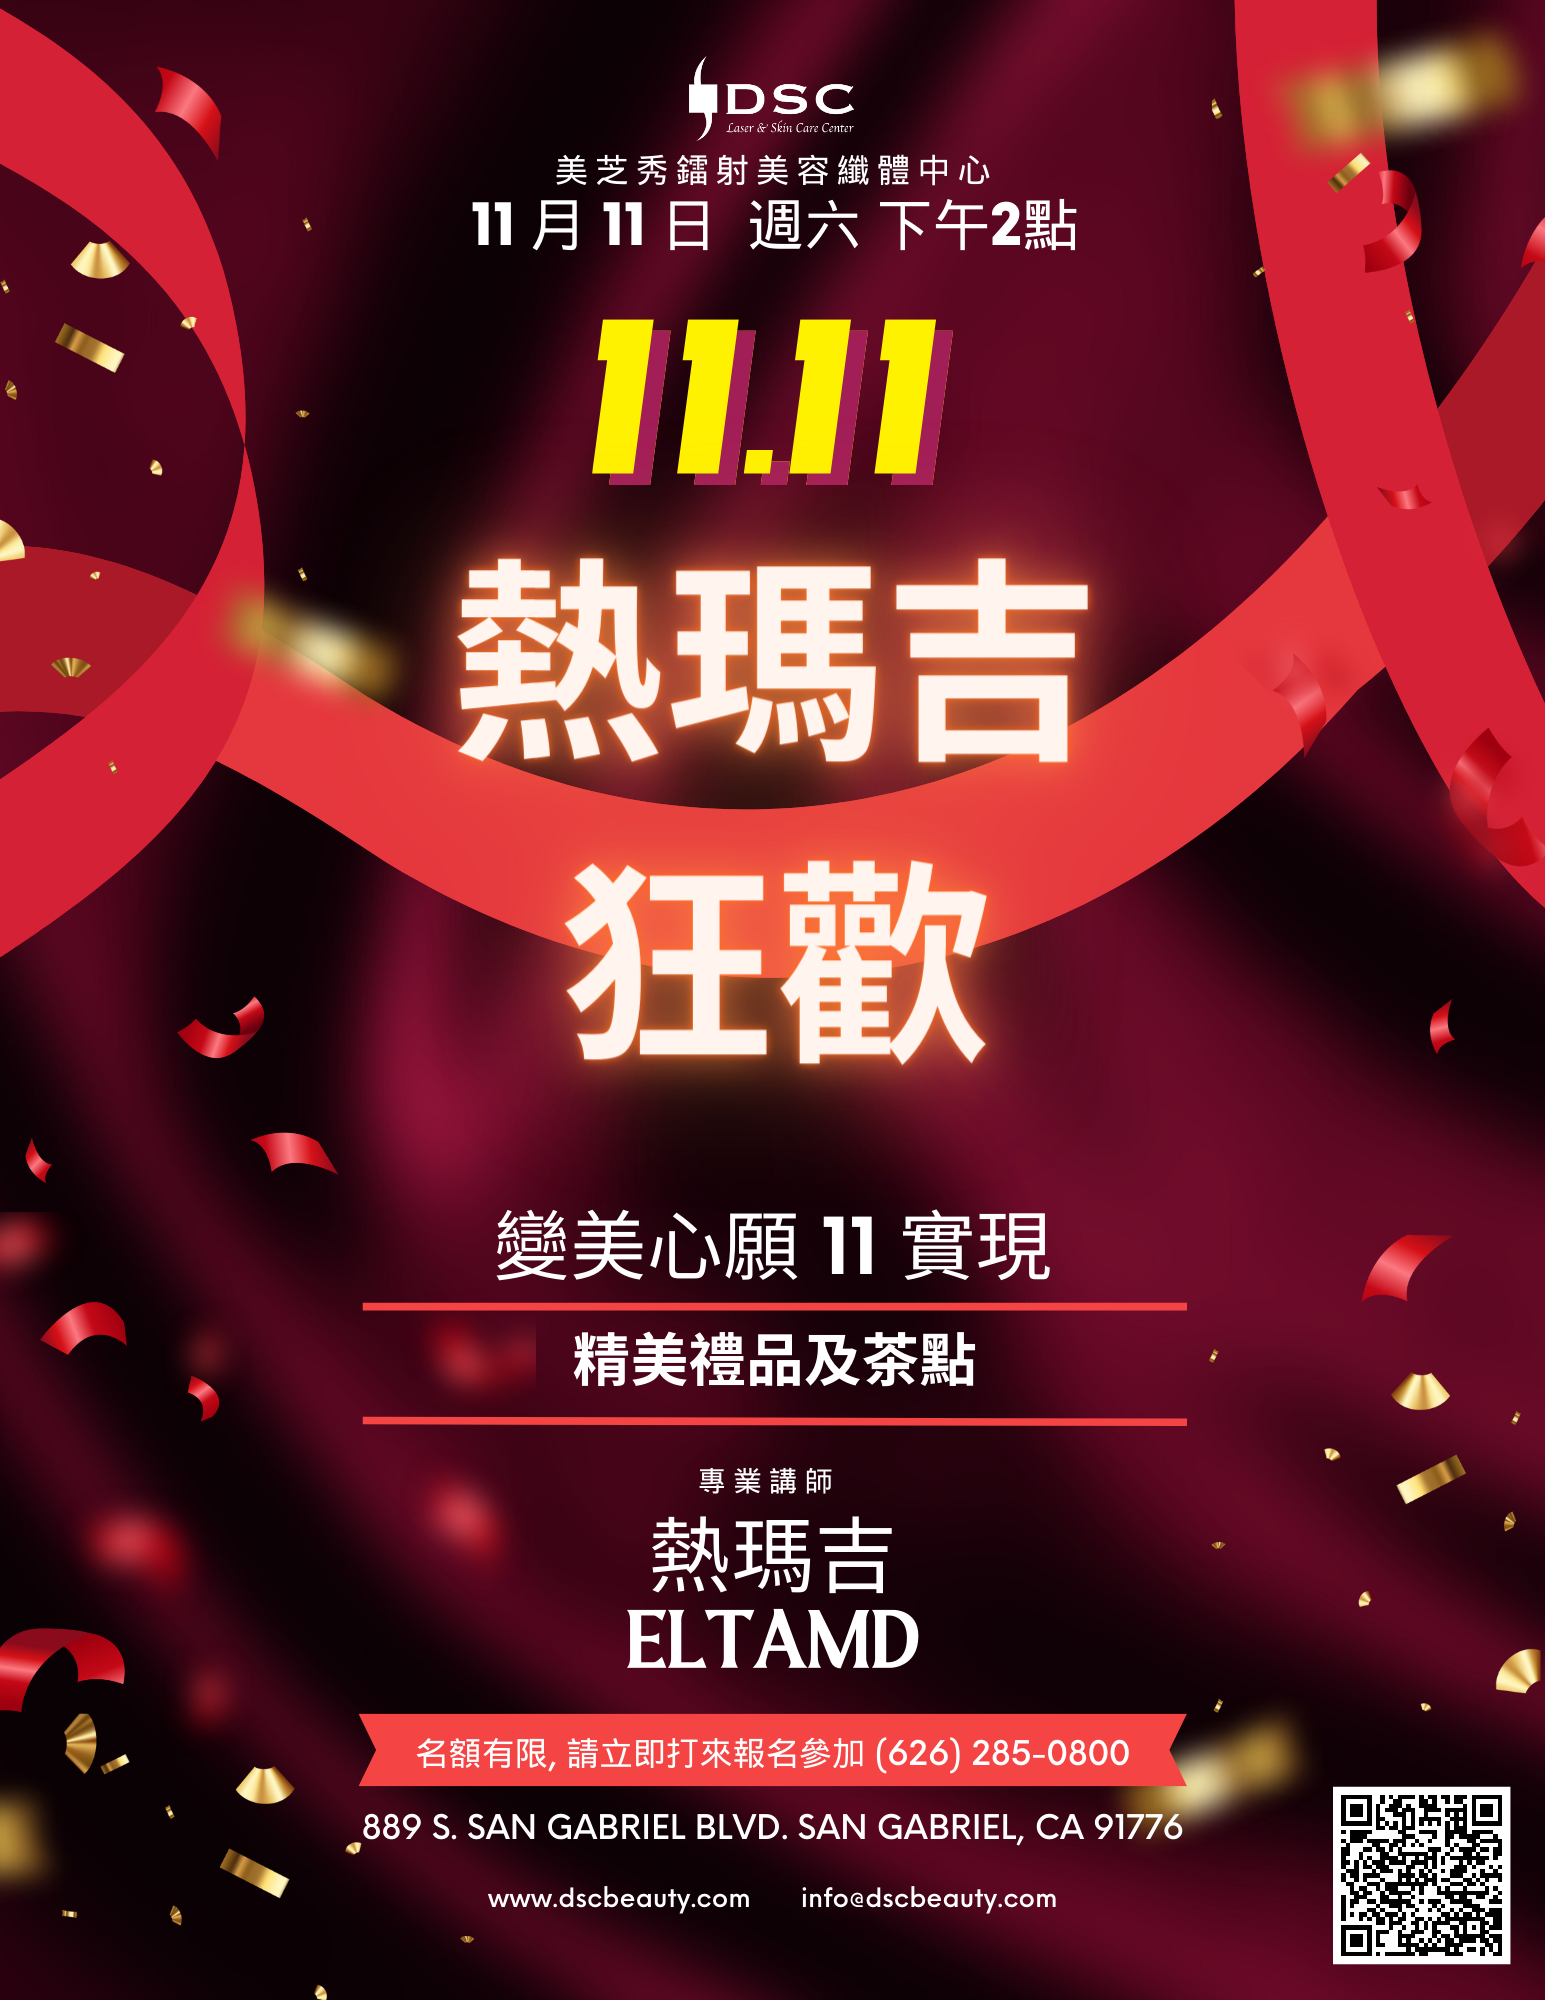 DSC 11/11 Singles' Day Thermage Event Flyer 2023 featuring red background and confetti shimmer with red ribbon and the text "11.11" over " Thermage Event" and "Celebrate double 11 with DSC" in Chinese